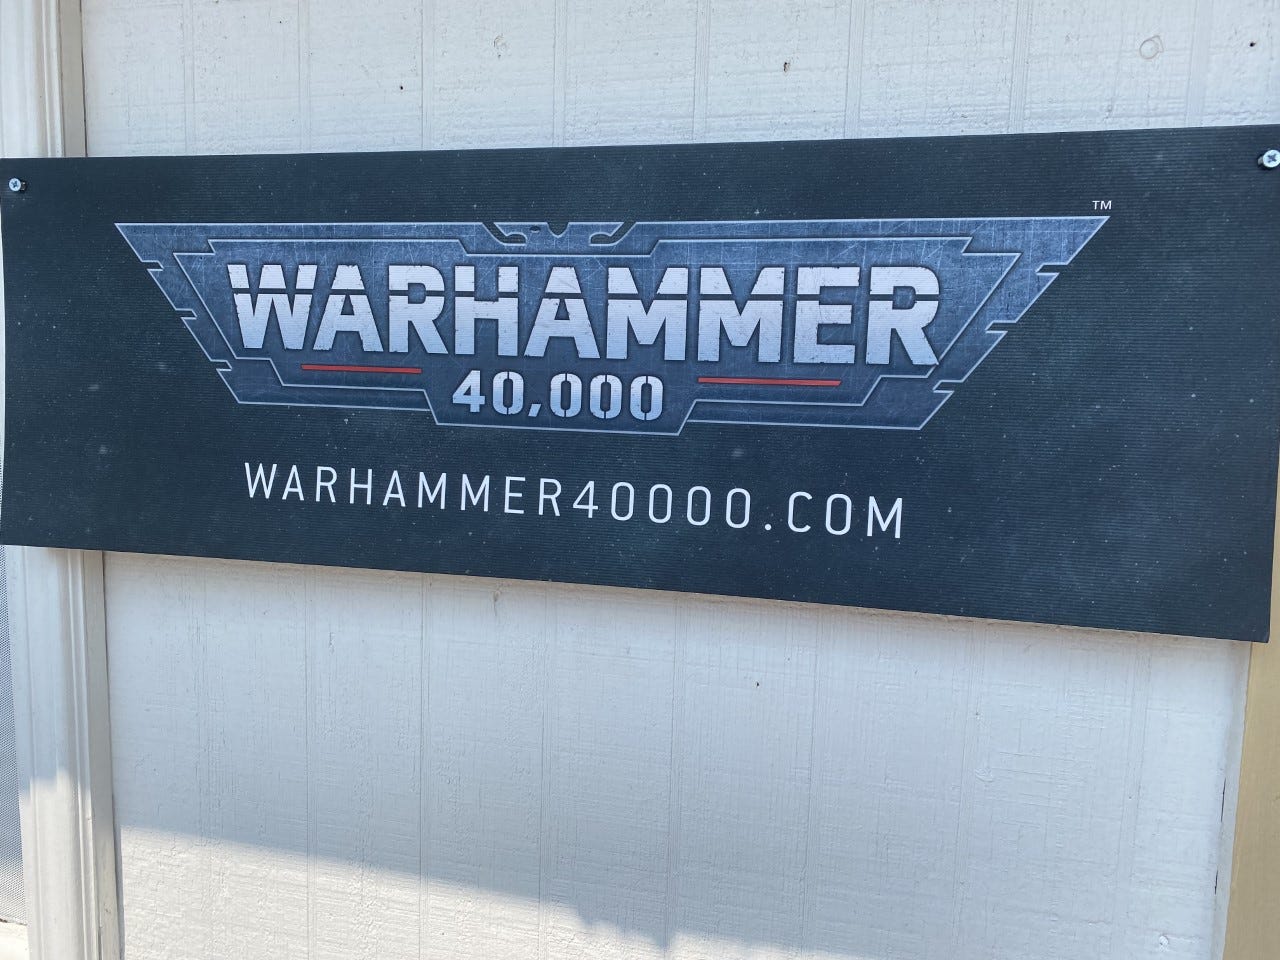 The Box held a Warhammer 40,000 tournament.